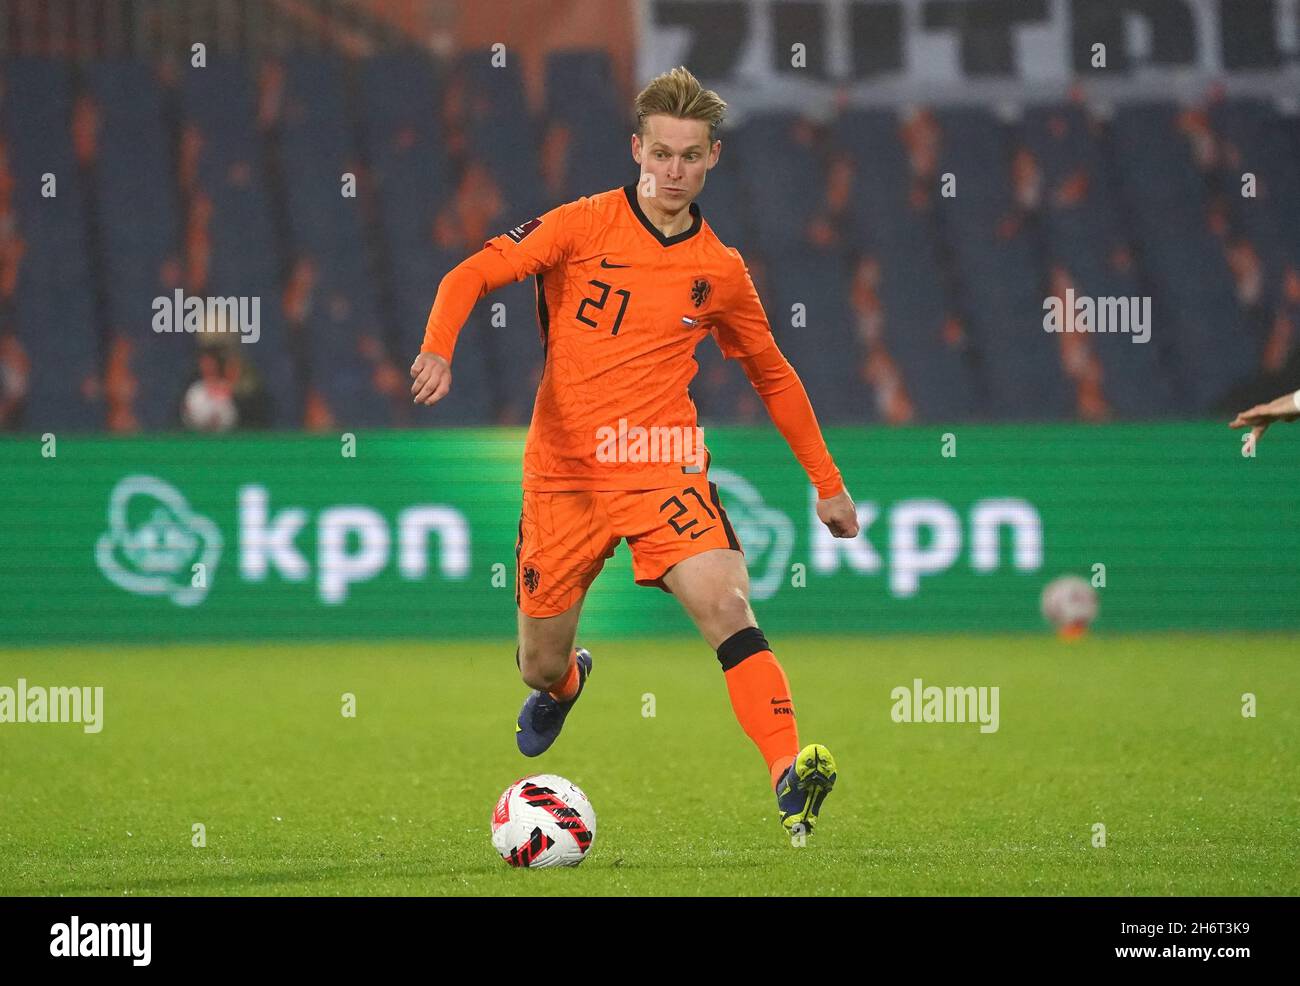 Rotterdam, Netherlands, November 17, 2021, Frenkie de Jong of the Netherlands in action during Fifa World Cup Qatar 2022 Qualifying Round Netherlands vs Norway on November 17, 2021 at stadium De Kuip in Rotterdam, Netherlands Foto: SCS/Soenar Chamid/AFLO (HOLLAND OUT) Stock Photo